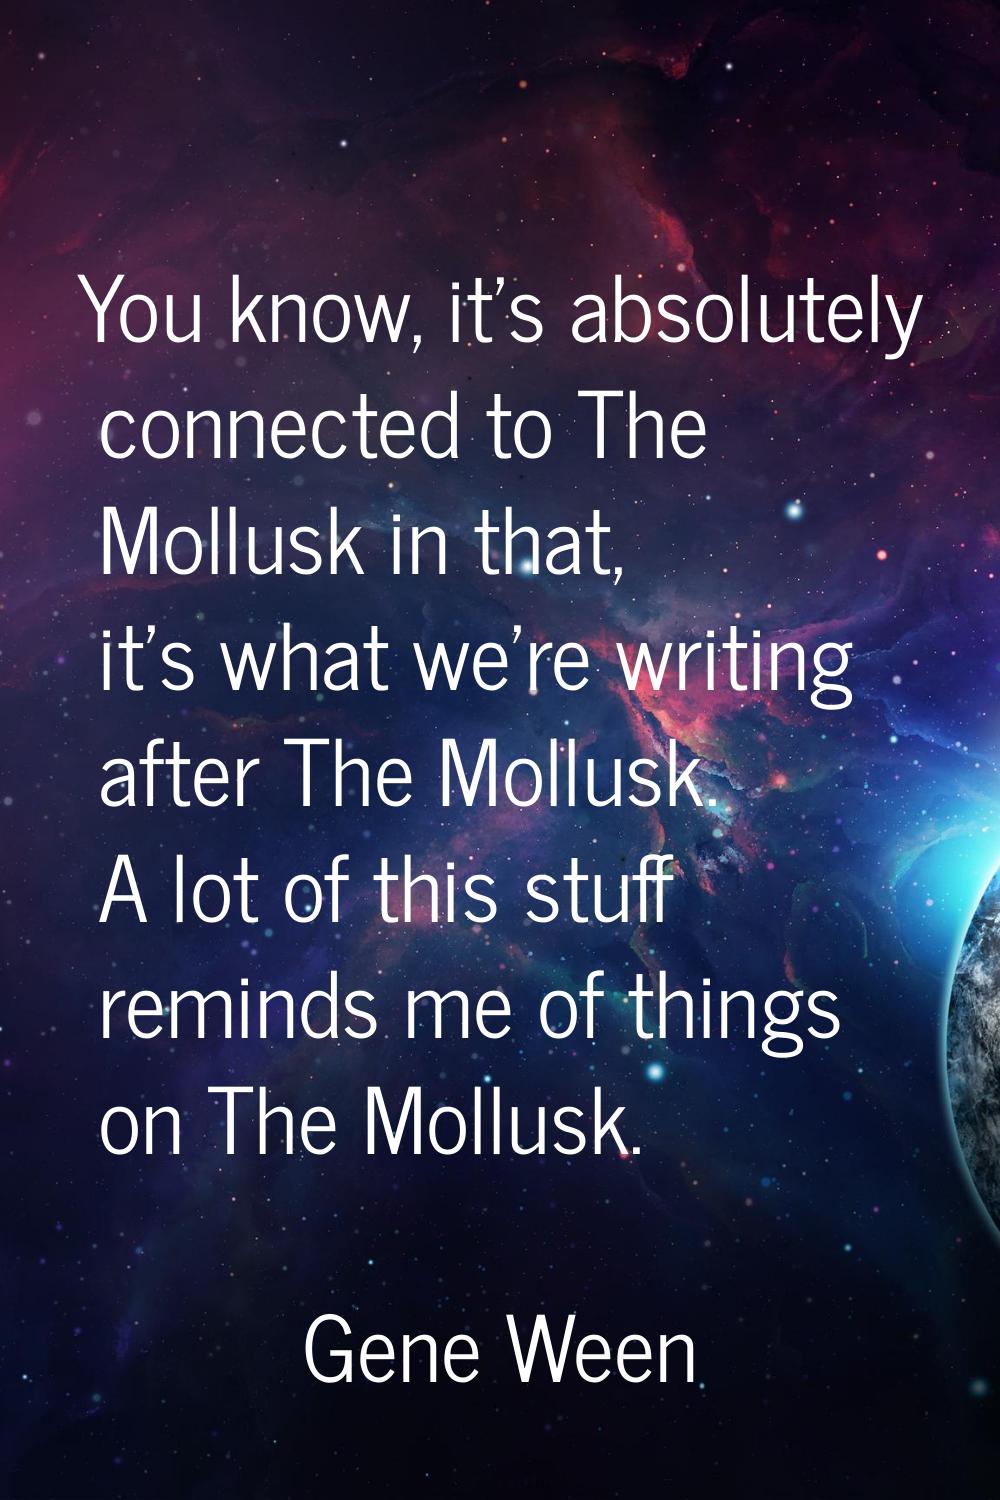 You know, it's absolutely connected to The Mollusk in that, it's what we're writing after The Mollu